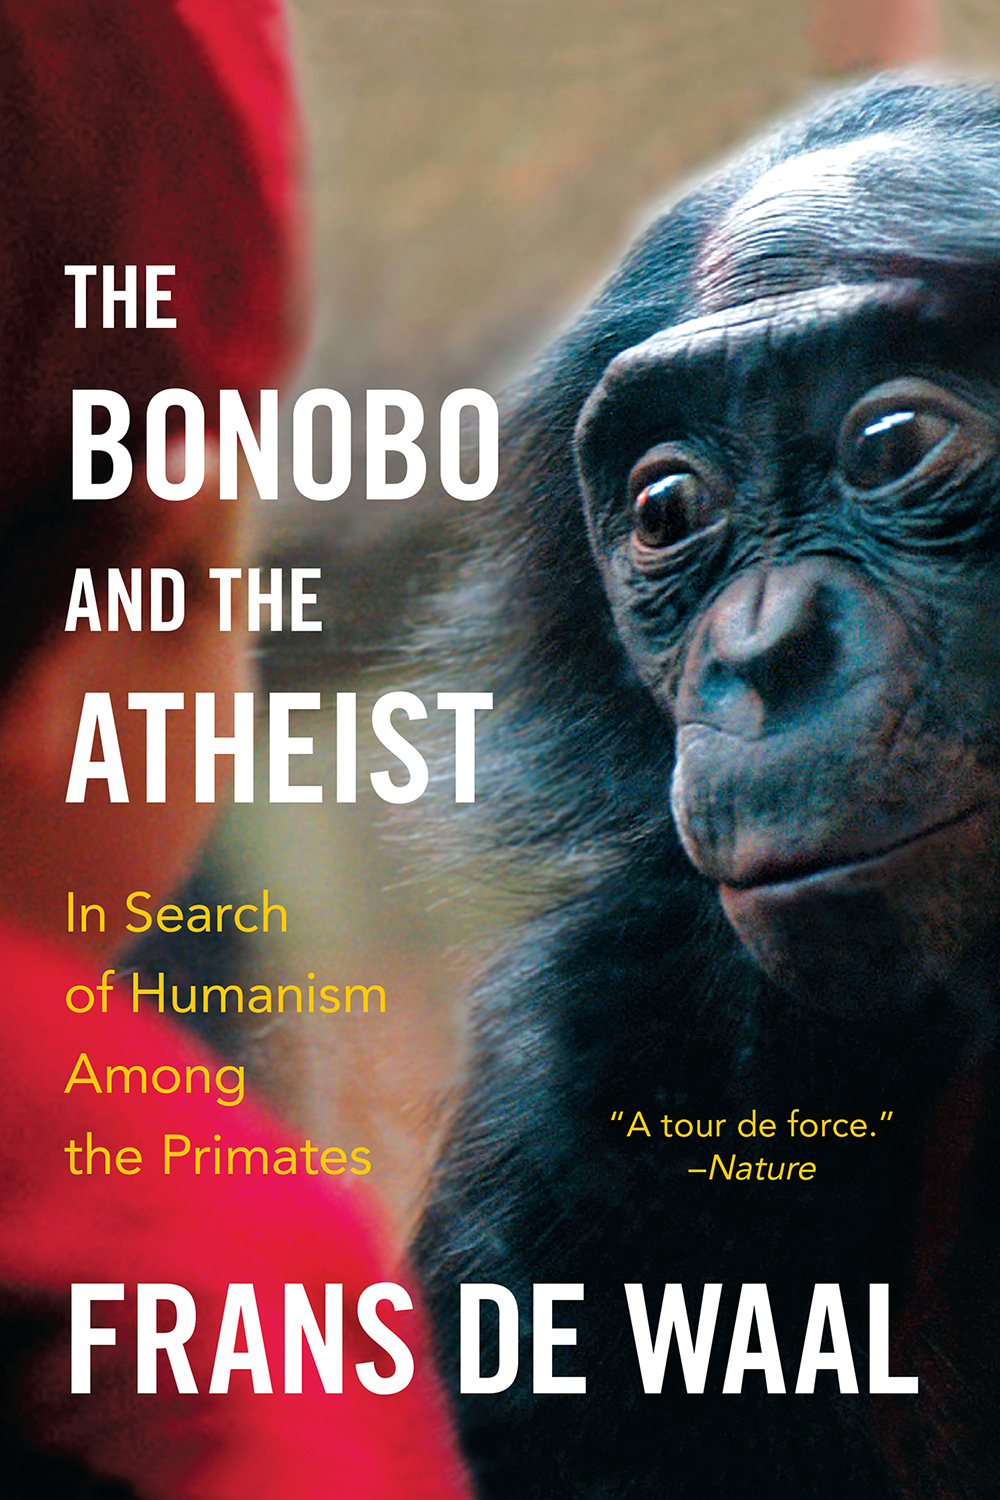 THE BONOBO and THE ATHEIST In Search of Humanism Among the Primates - photo 1